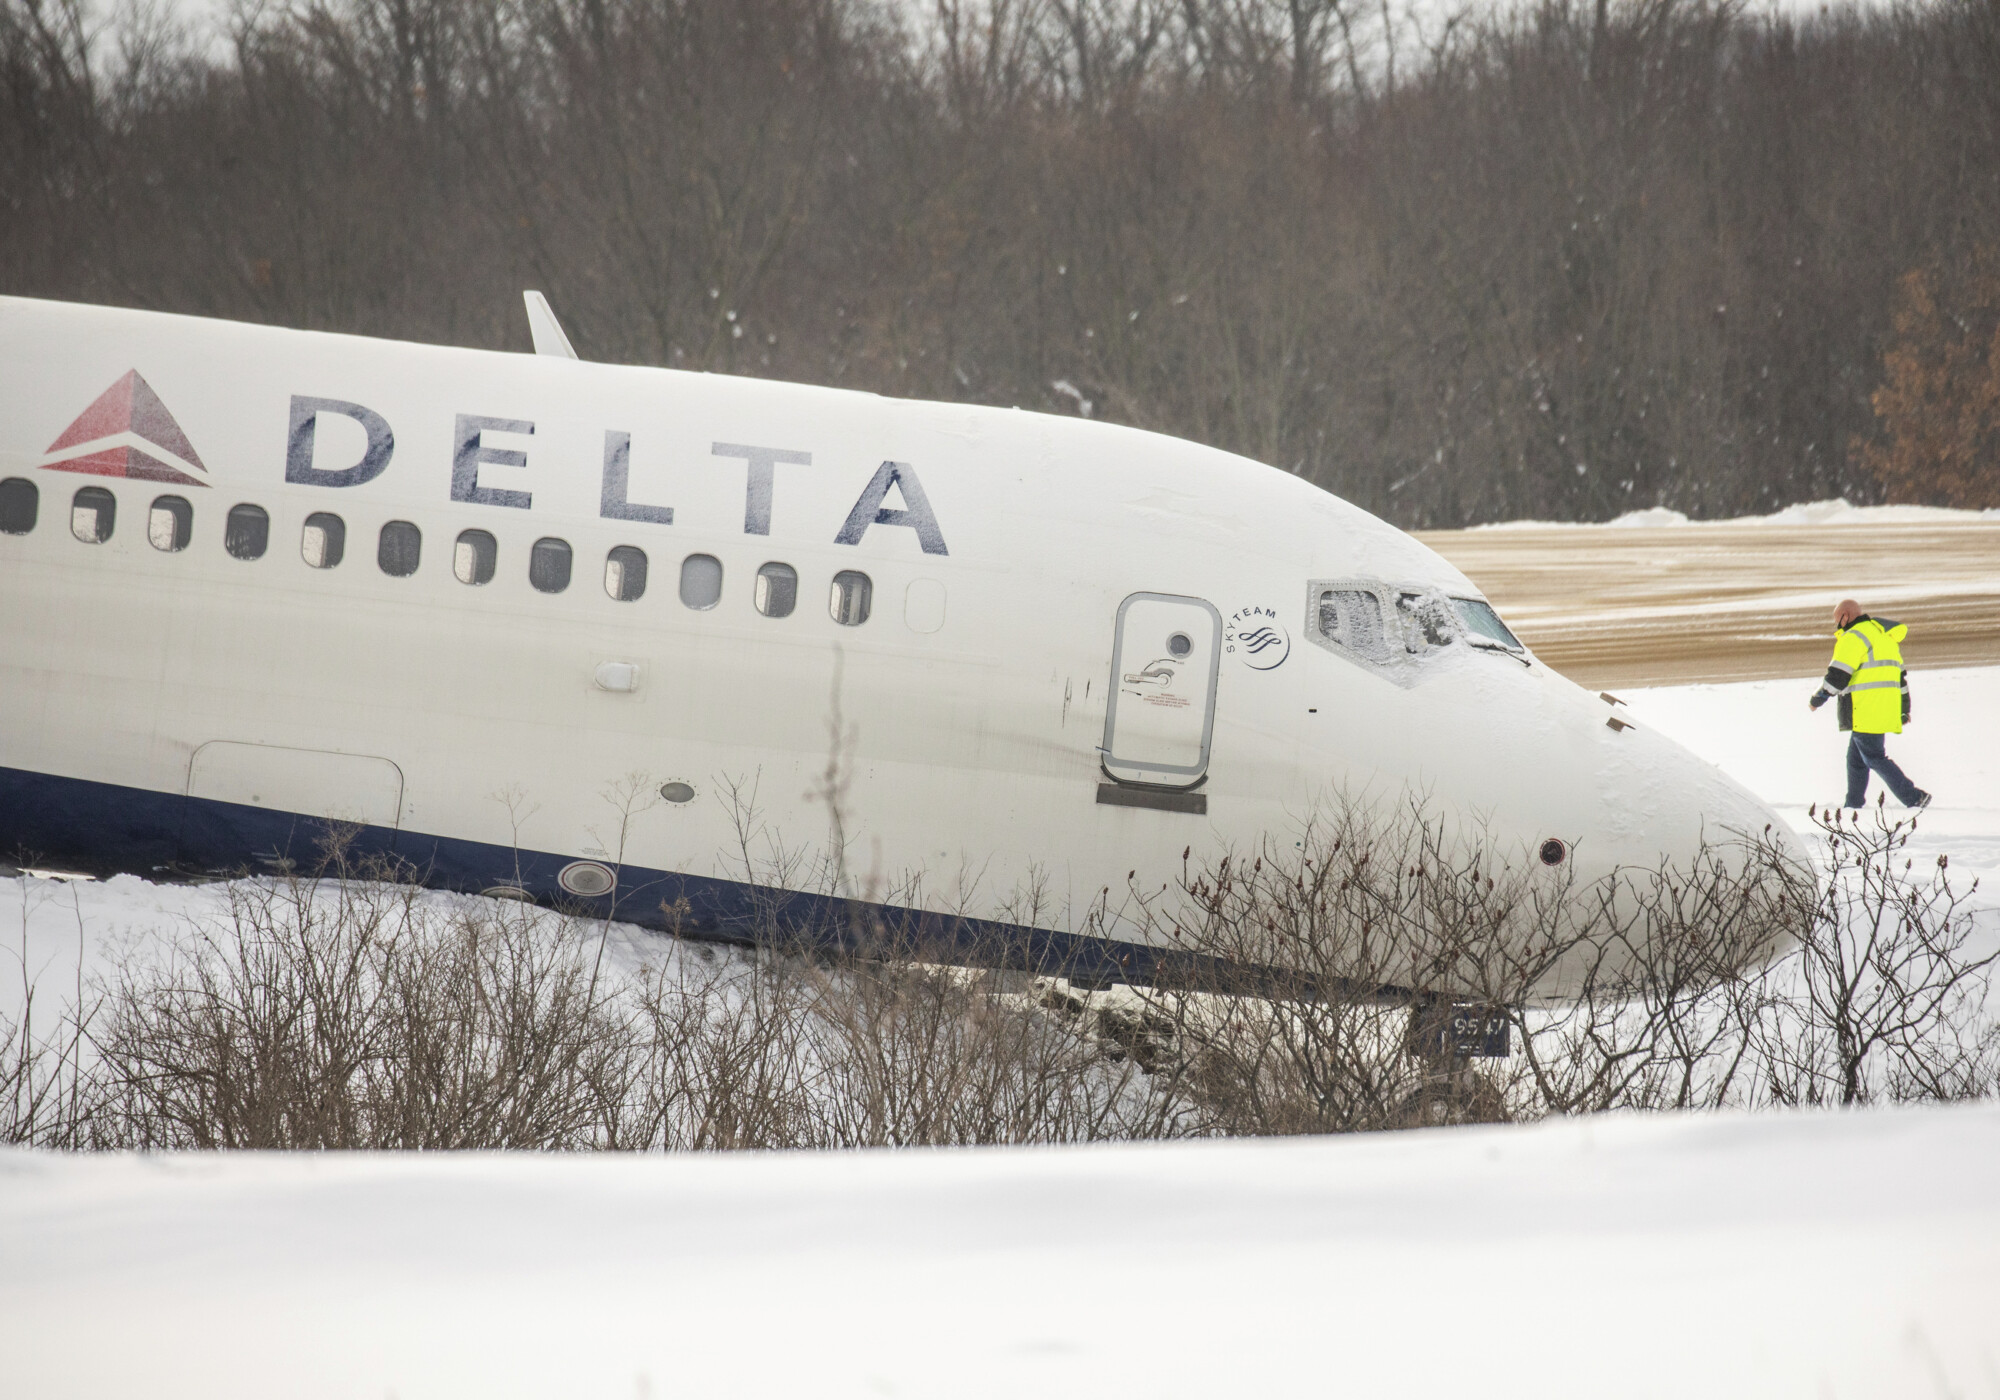 Plane Slides Off Taxiway at Pittsburgh Airport; No Injuries